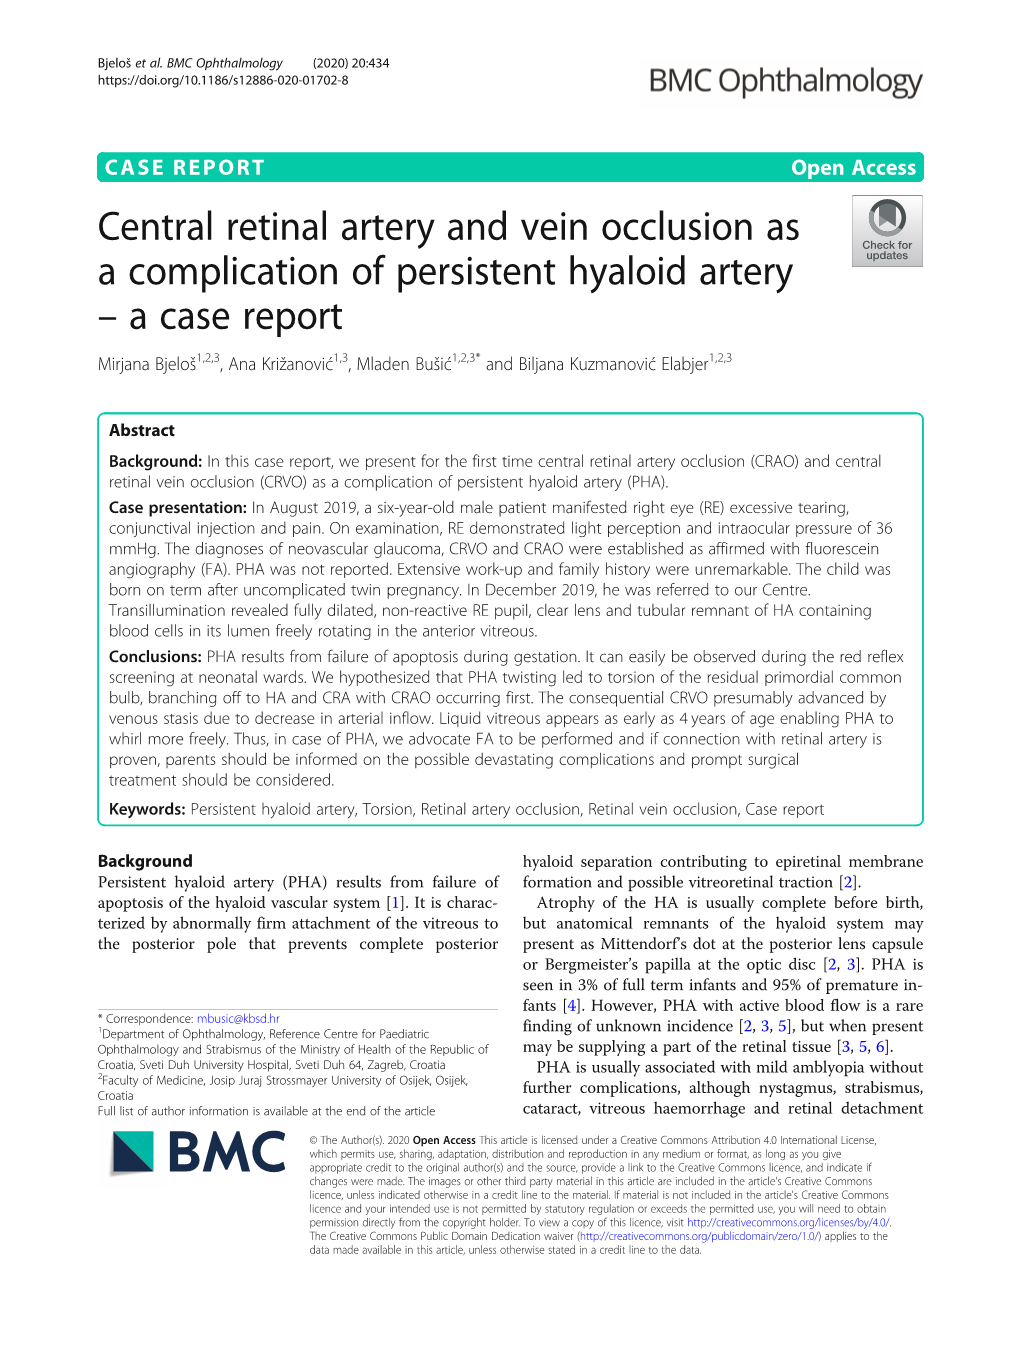 Central Retinal Artery and Vein Occlusion As a Complication of Persistent Hyaloid Artery